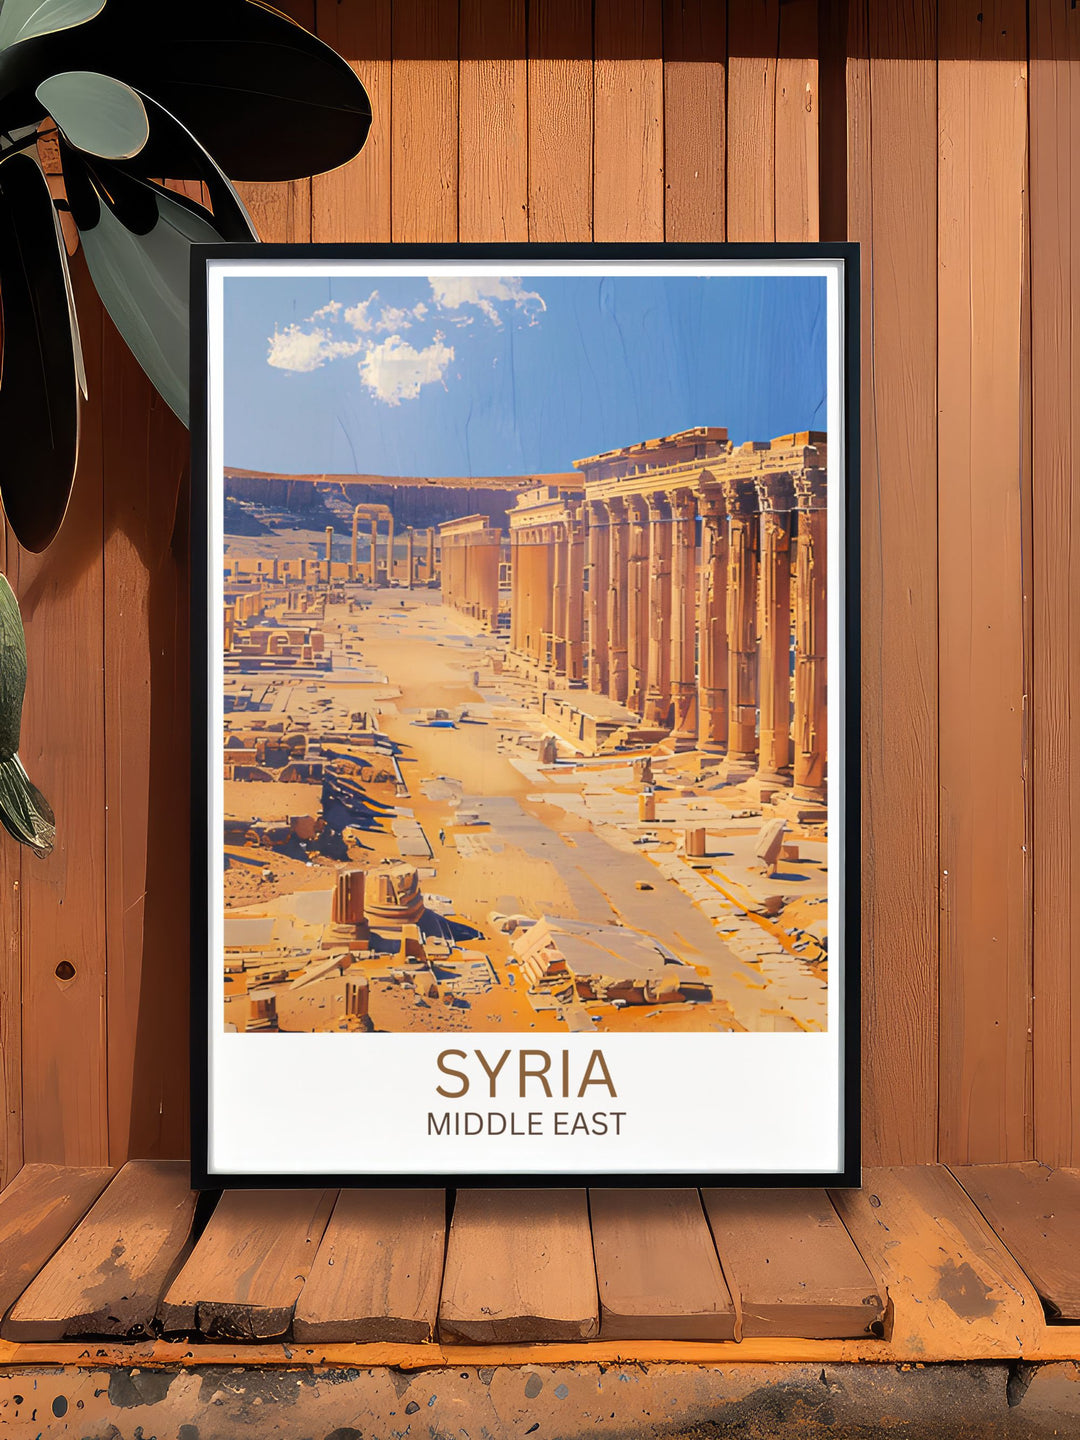 Christmas gift option with a Syria painting, perfect for those fascinated by Middle Eastern art and history.